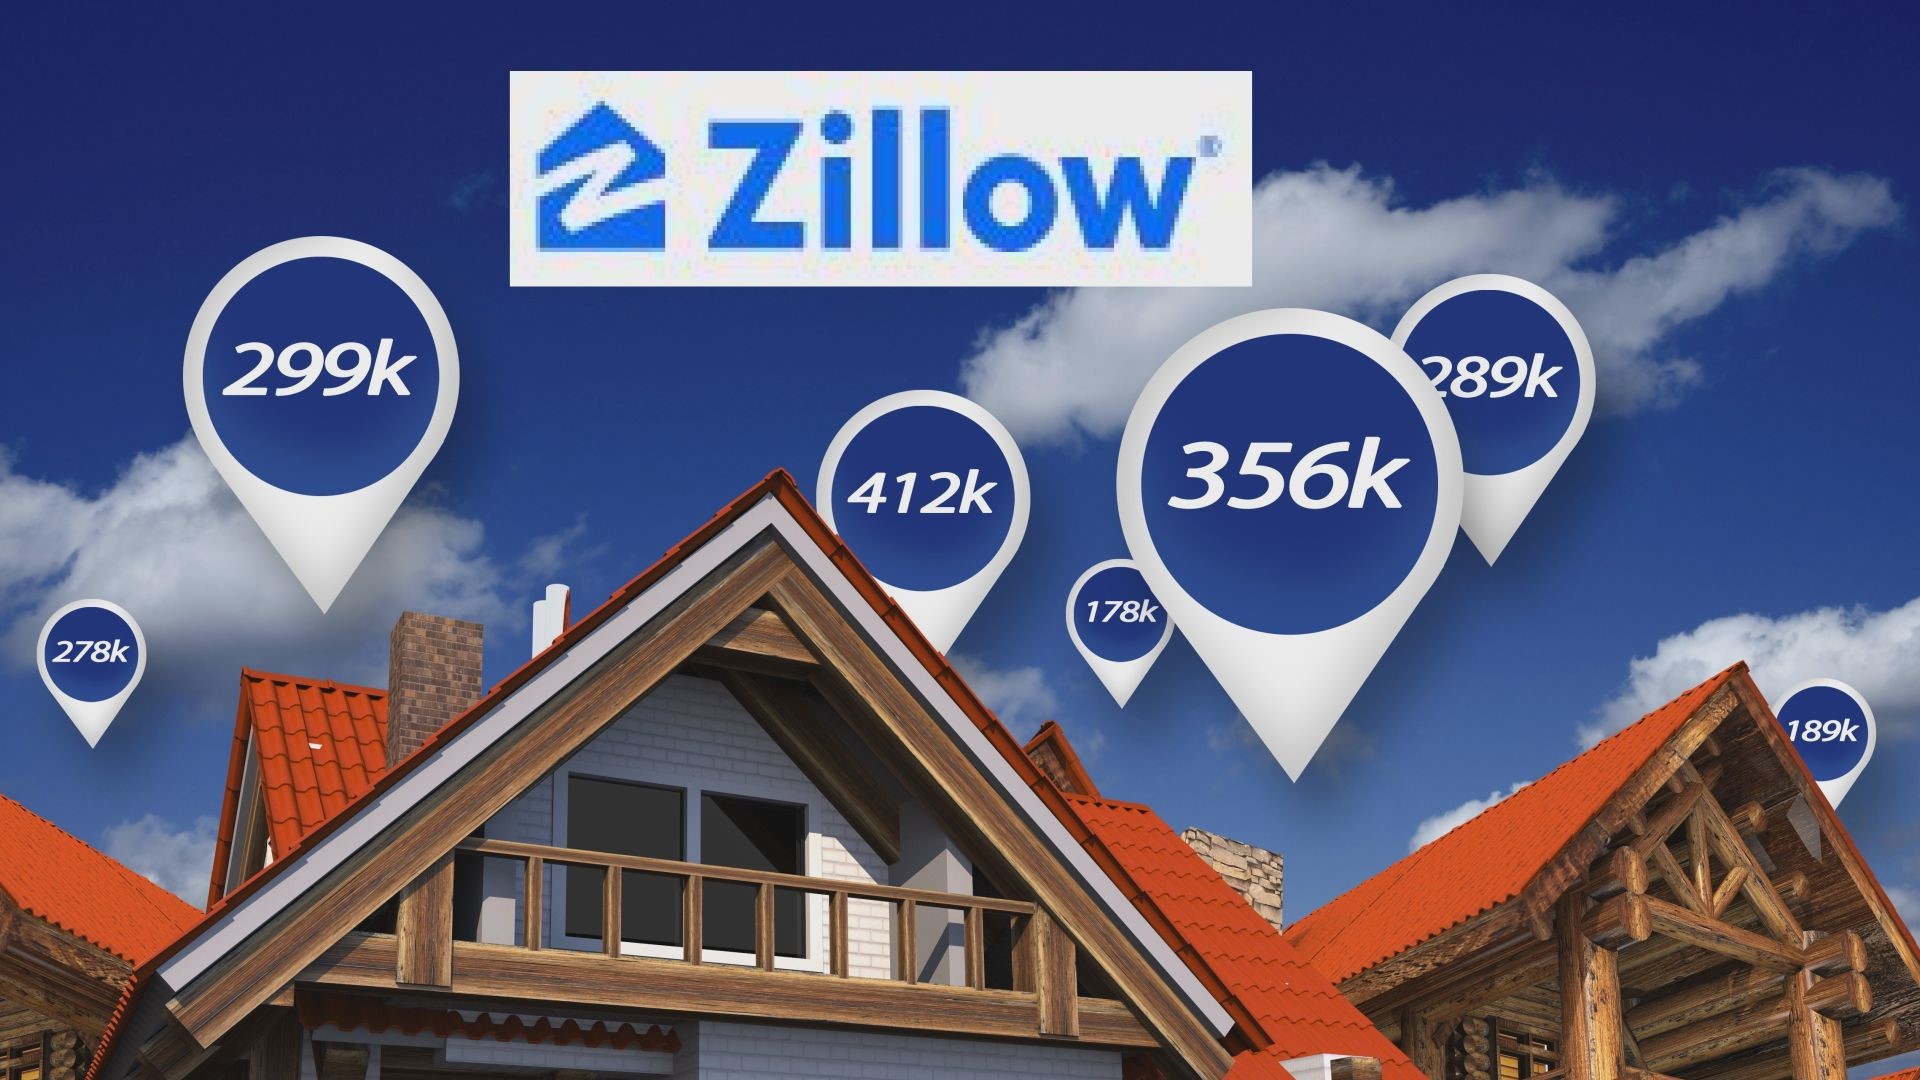 Maybe you see your home value is up, up, up on Zillow and similar apps. But how accurate are those home estimates? A realtor says, don't take it at face value.